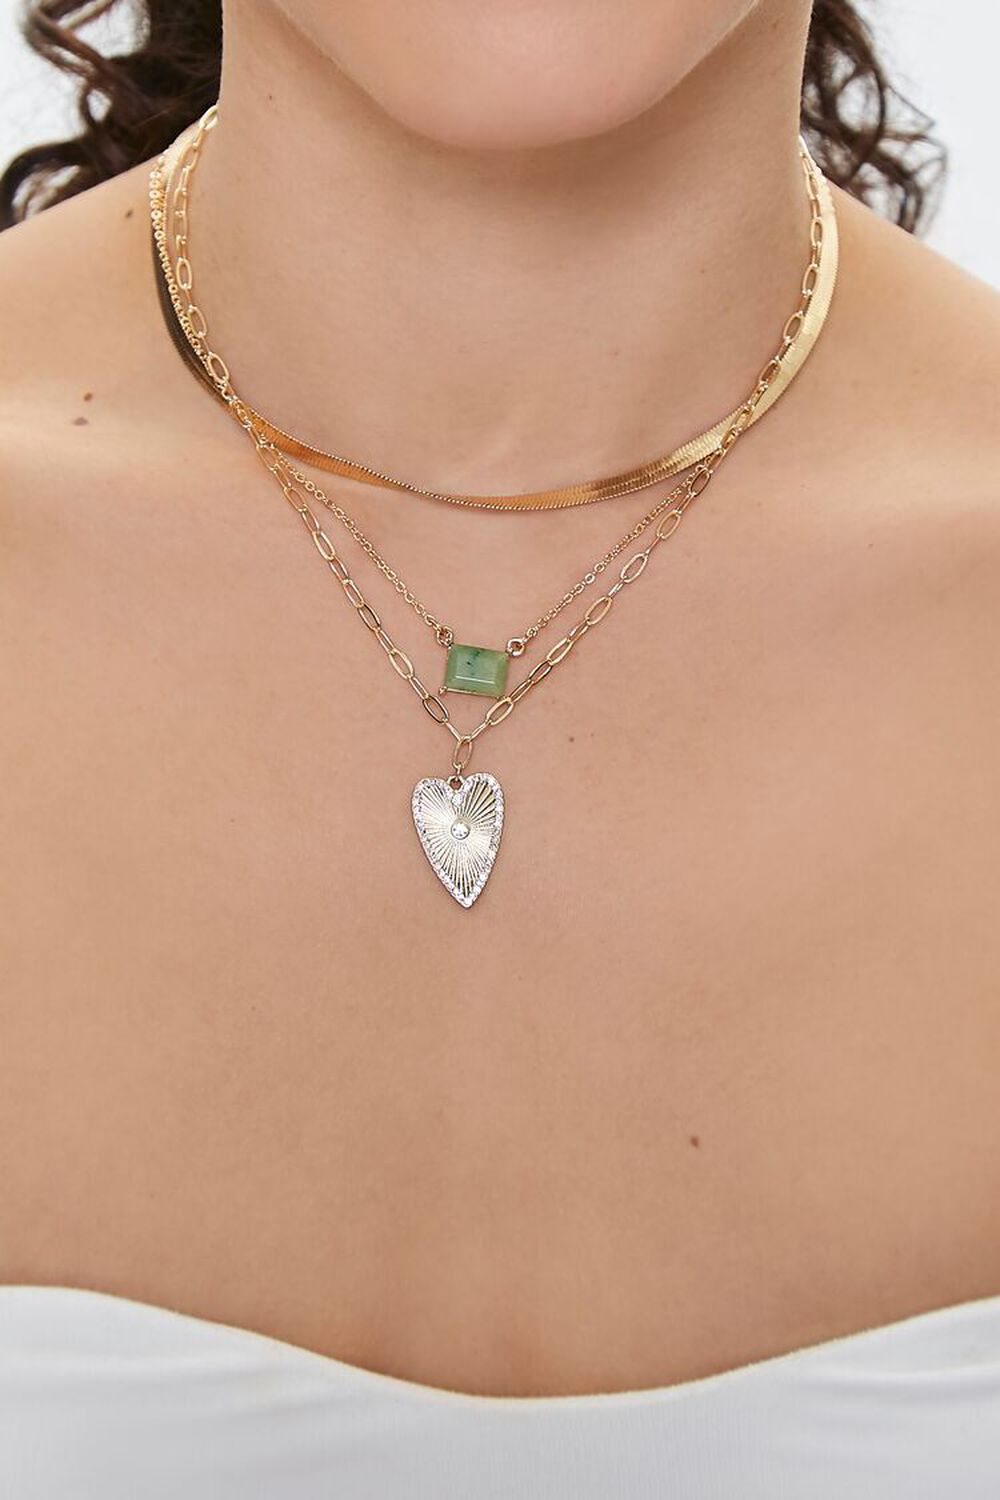 GOLD Heart Pendant Layered Necklace, image 1